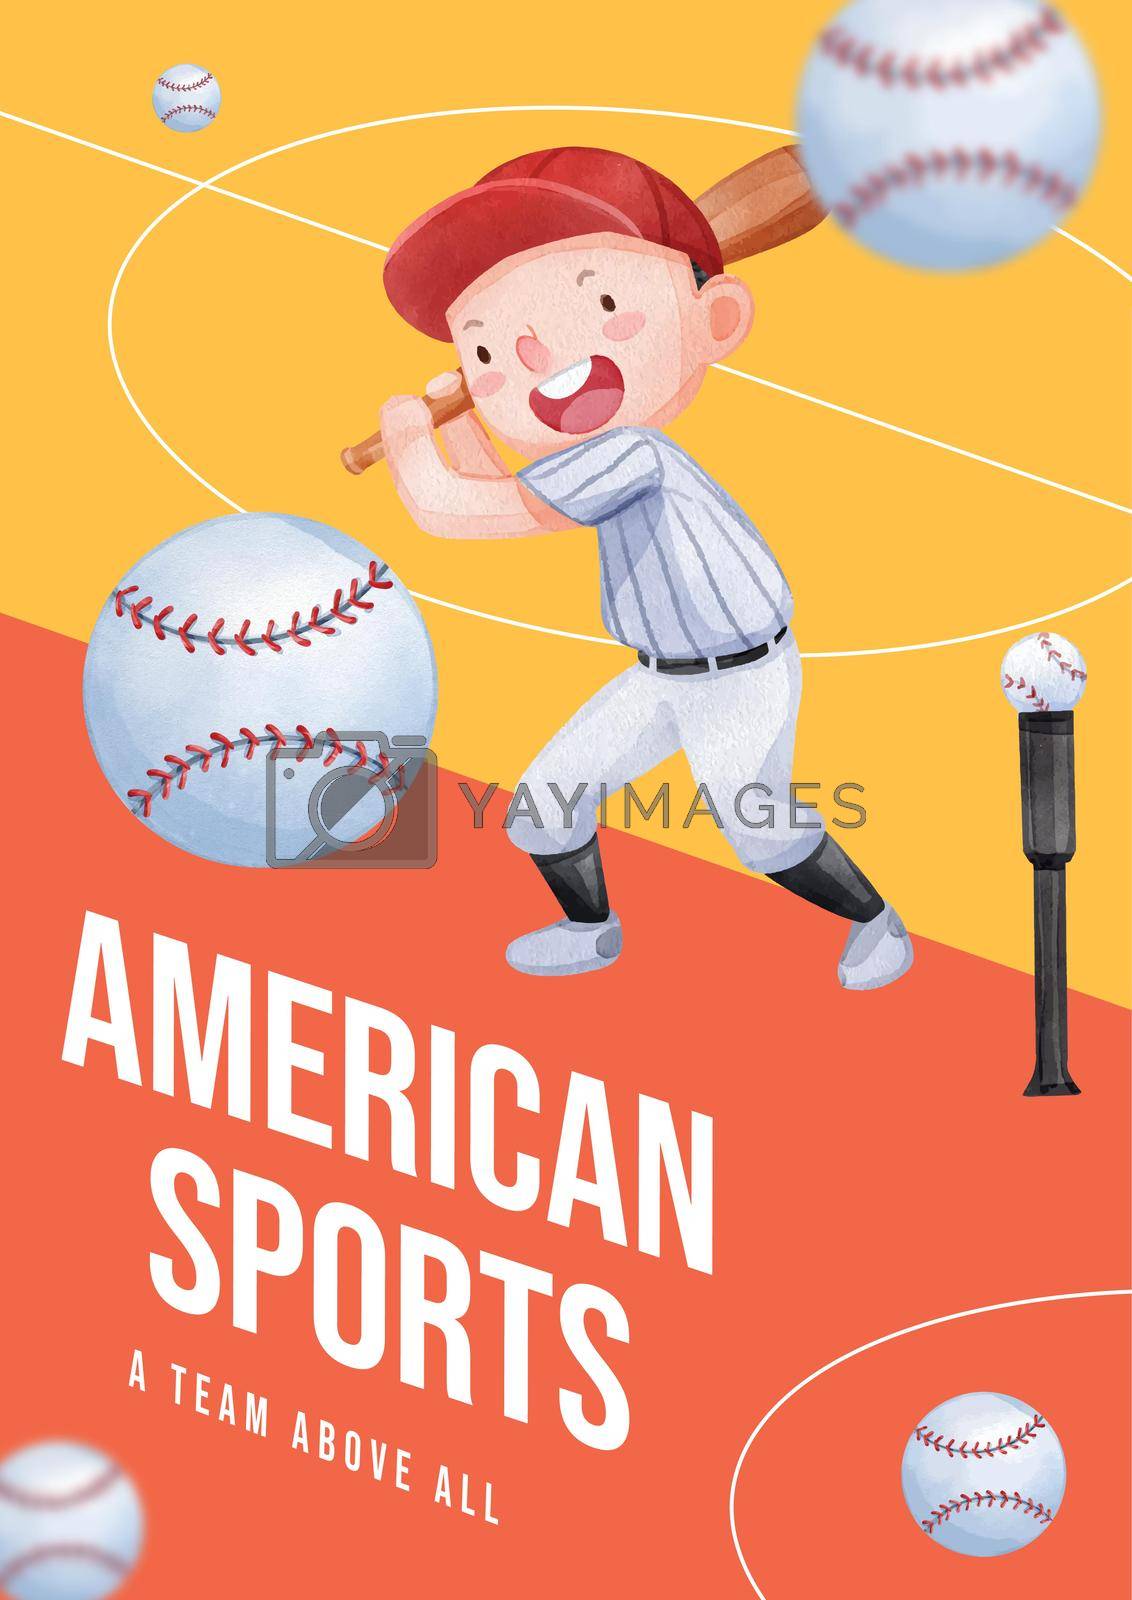 Royalty free image of Poster template with American sport kids concept,watercolor style by Photographeeasia